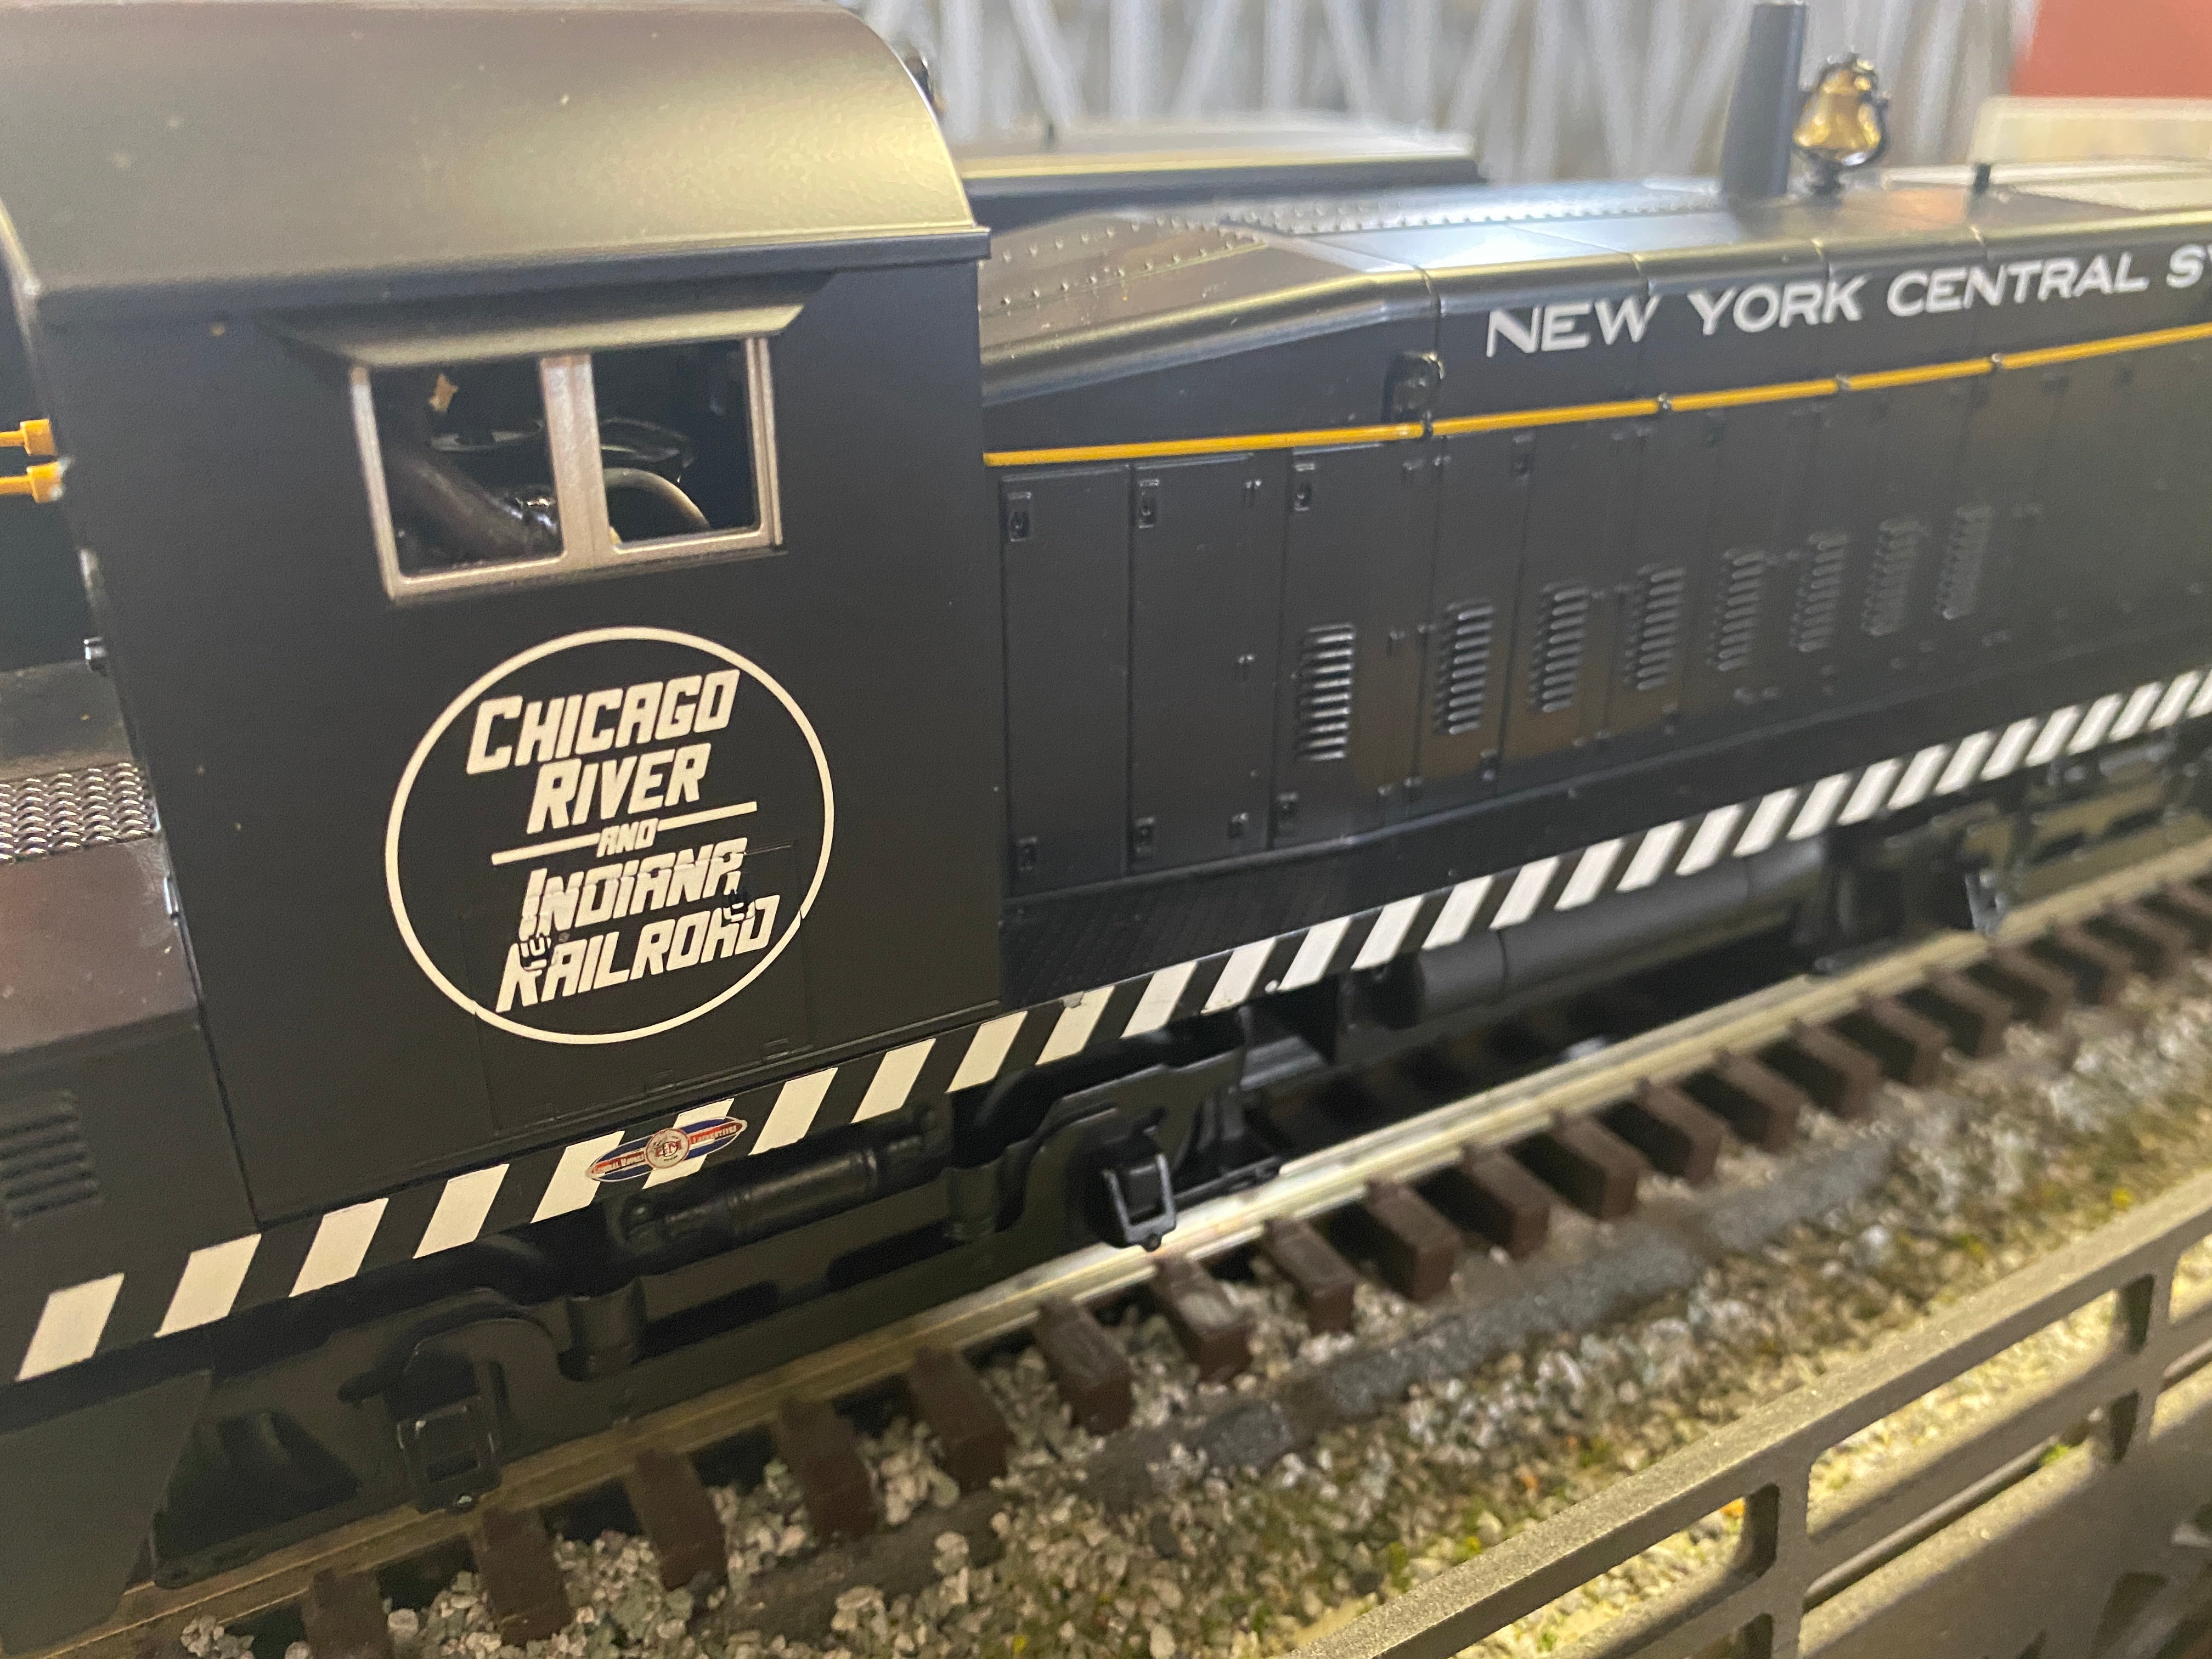 MTH 30-20918-1 - SW-8 Switcher Diesel Engine "Chicago River & Indiana" w/ PS3 #8600 - Custom Run for MrMuffin'sTrains